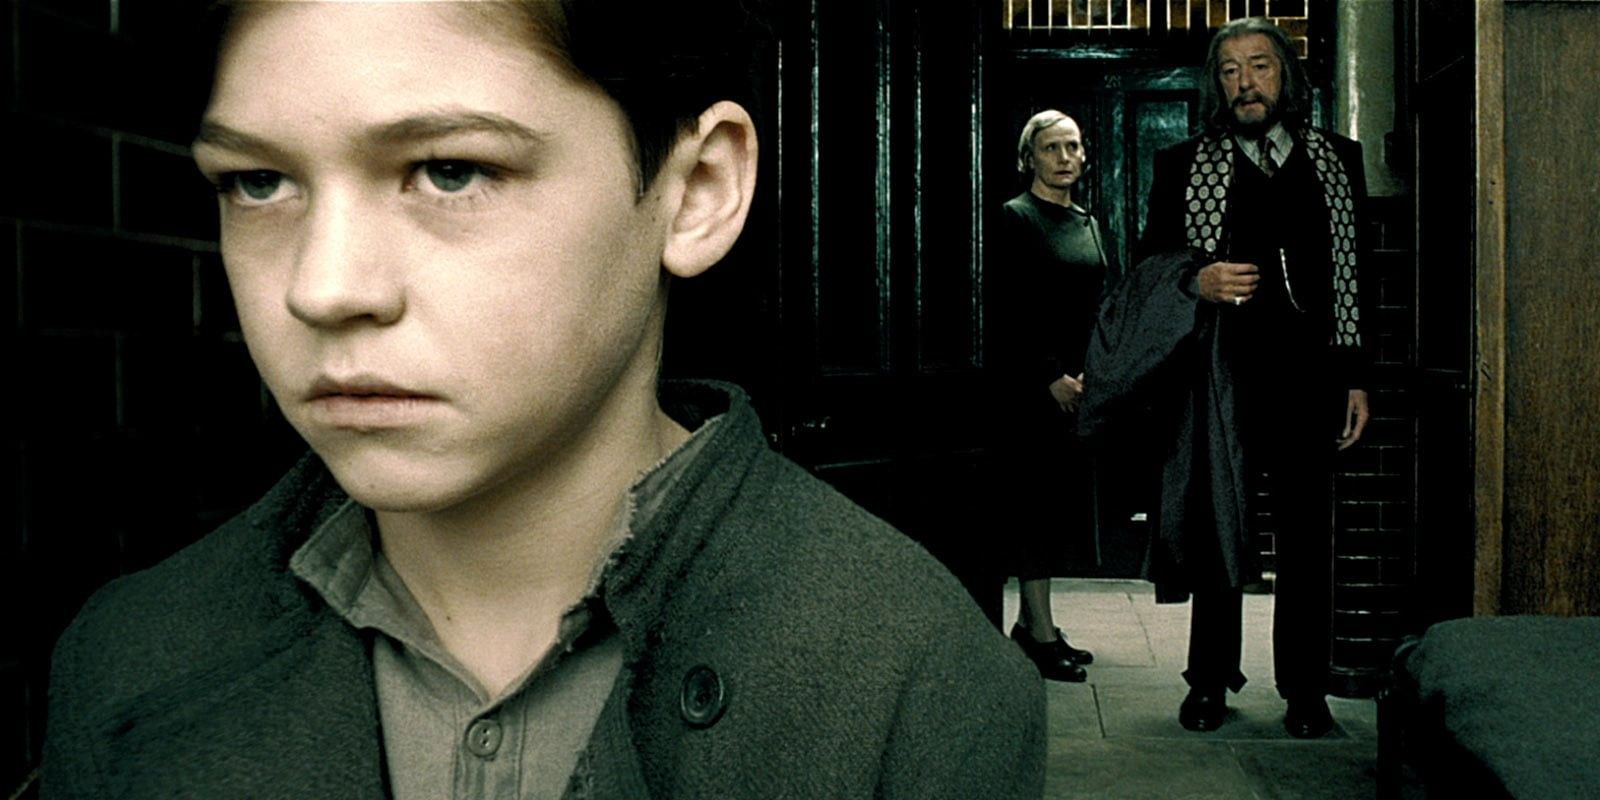 Dumbledore visits Tom Riddle at his orphanage in Harry Potter 